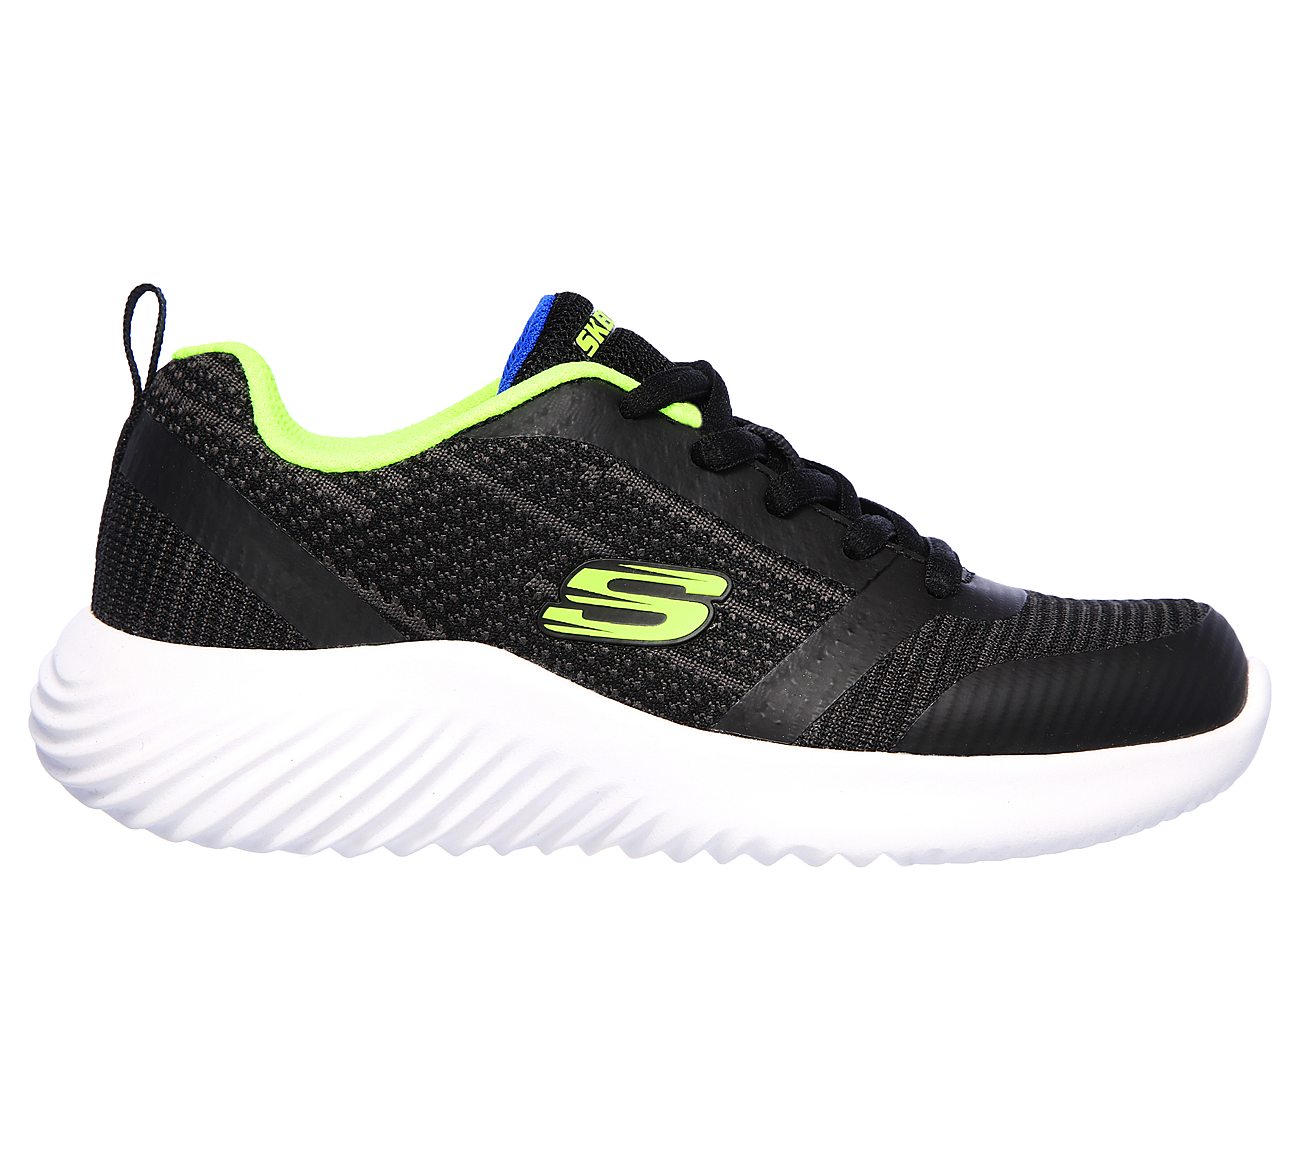 BOUNDER -, BLACK/BLUE/LIME Footwear Right View